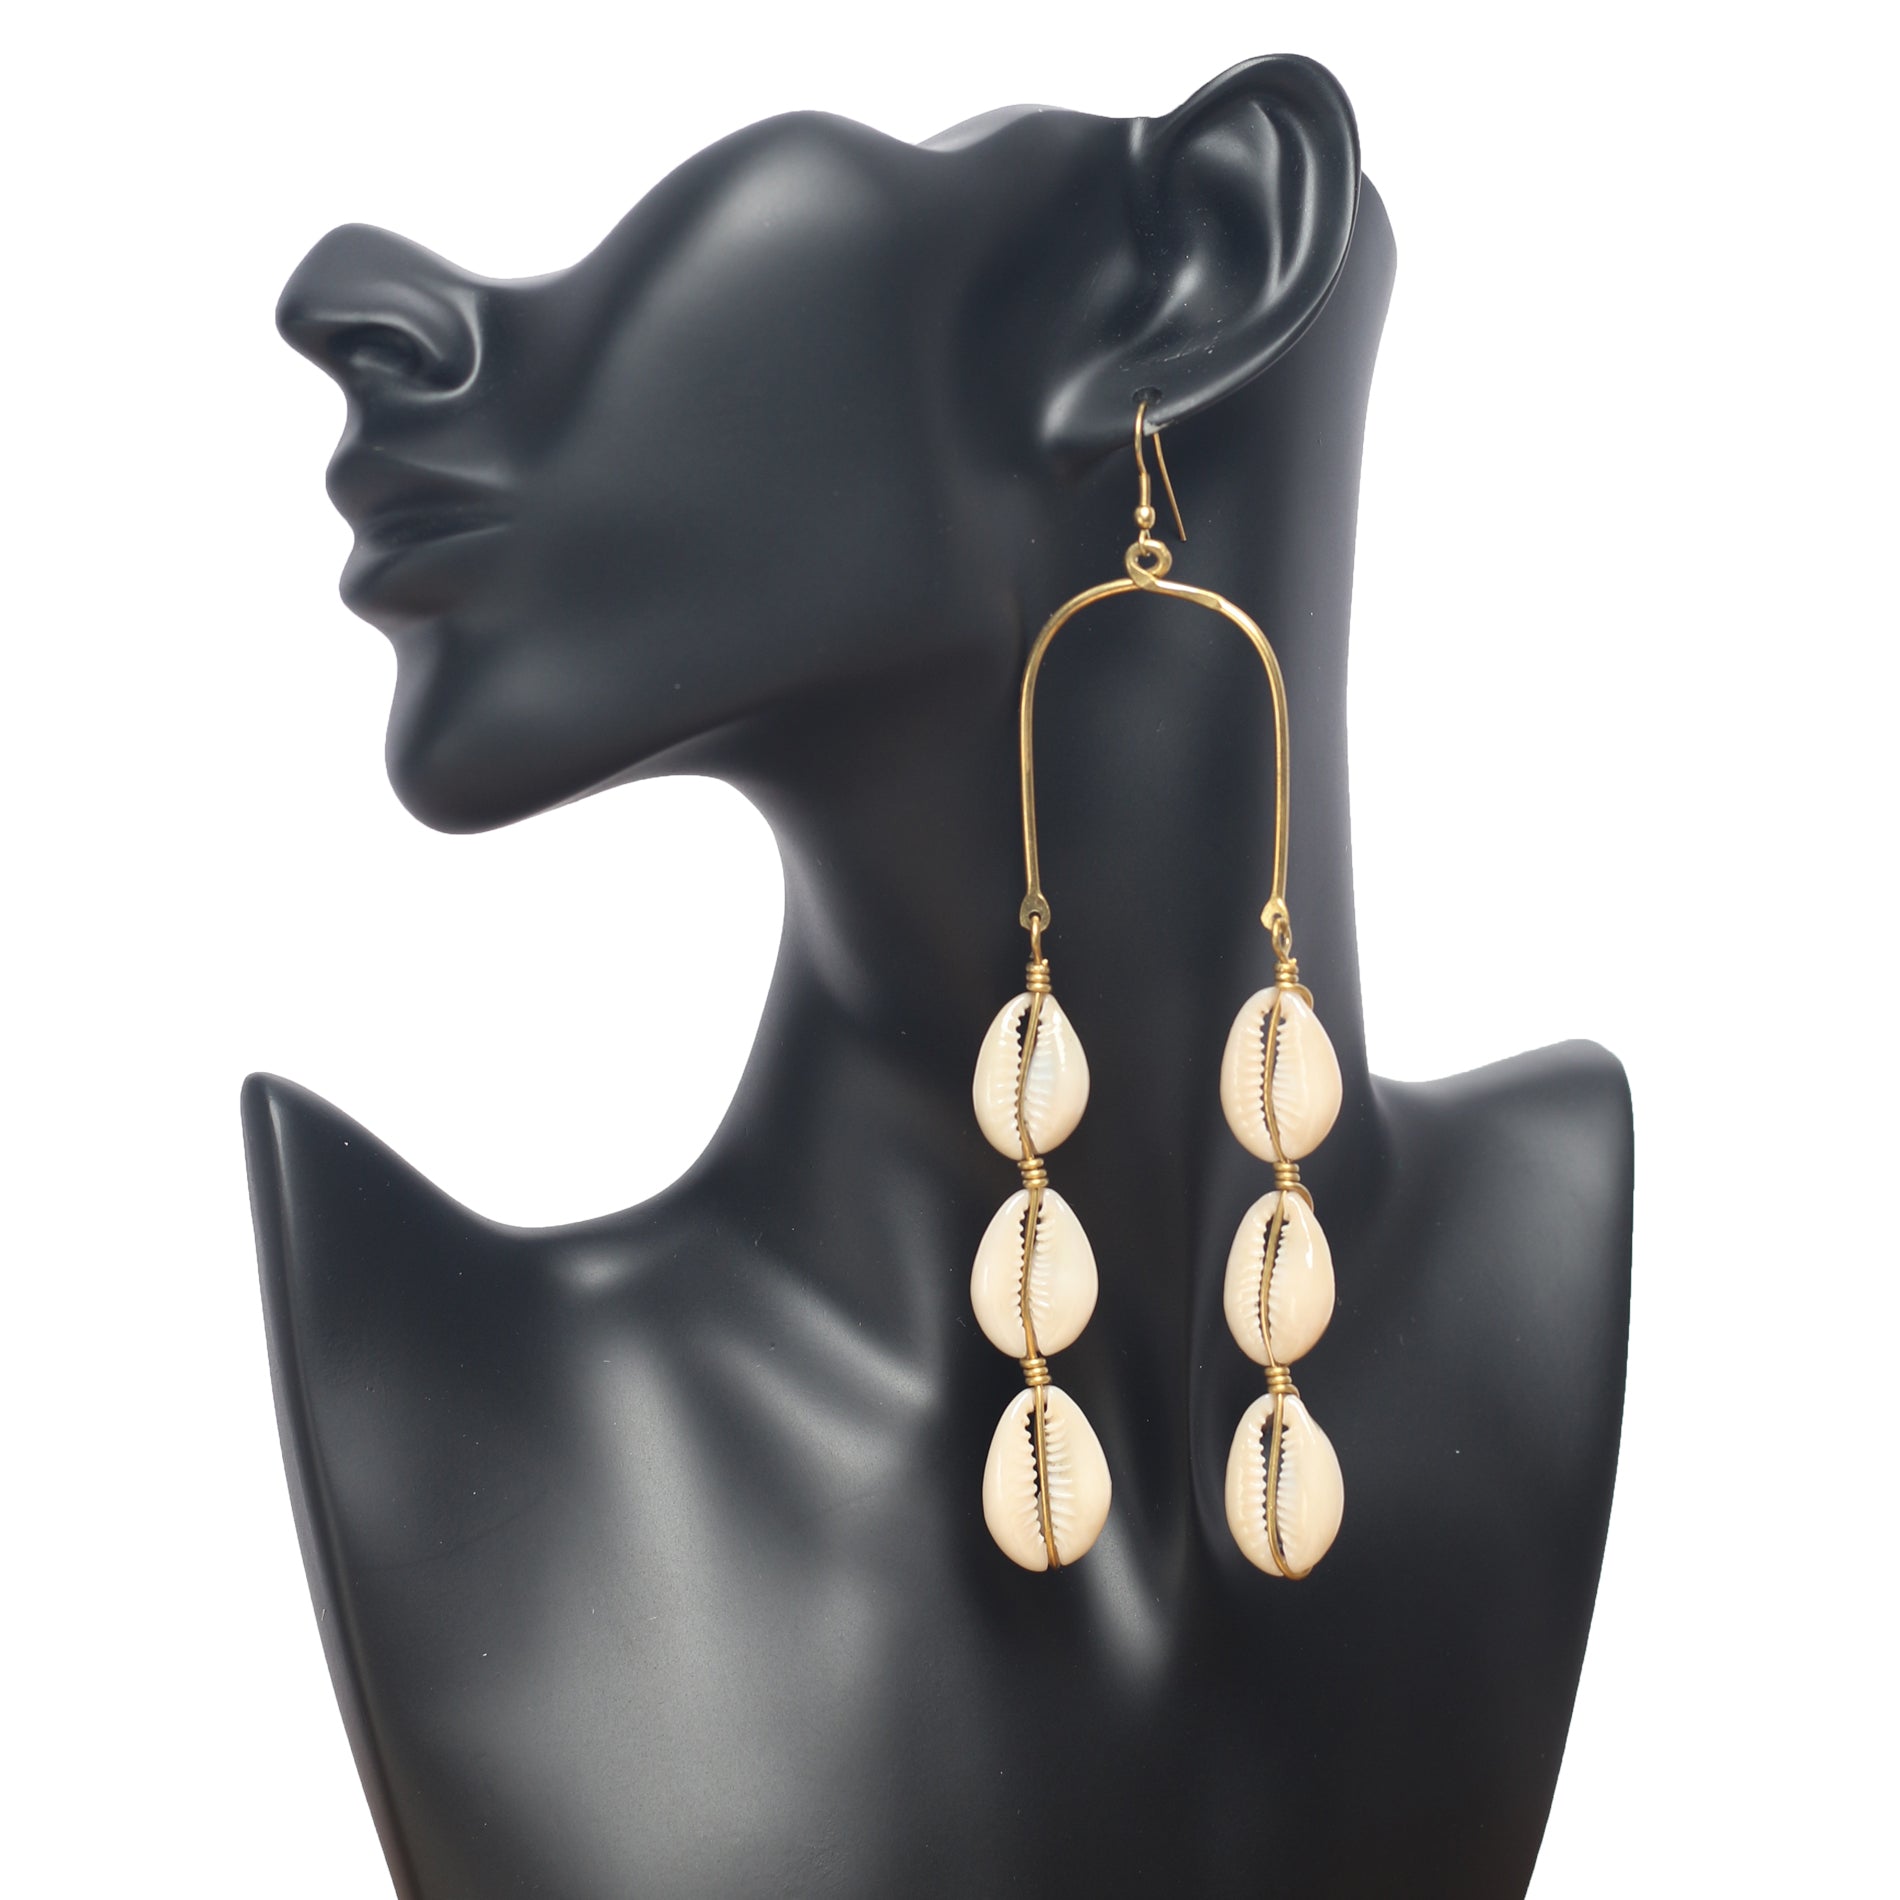 Long Shell Earrings. Made with gold plated brass and cowrie shells